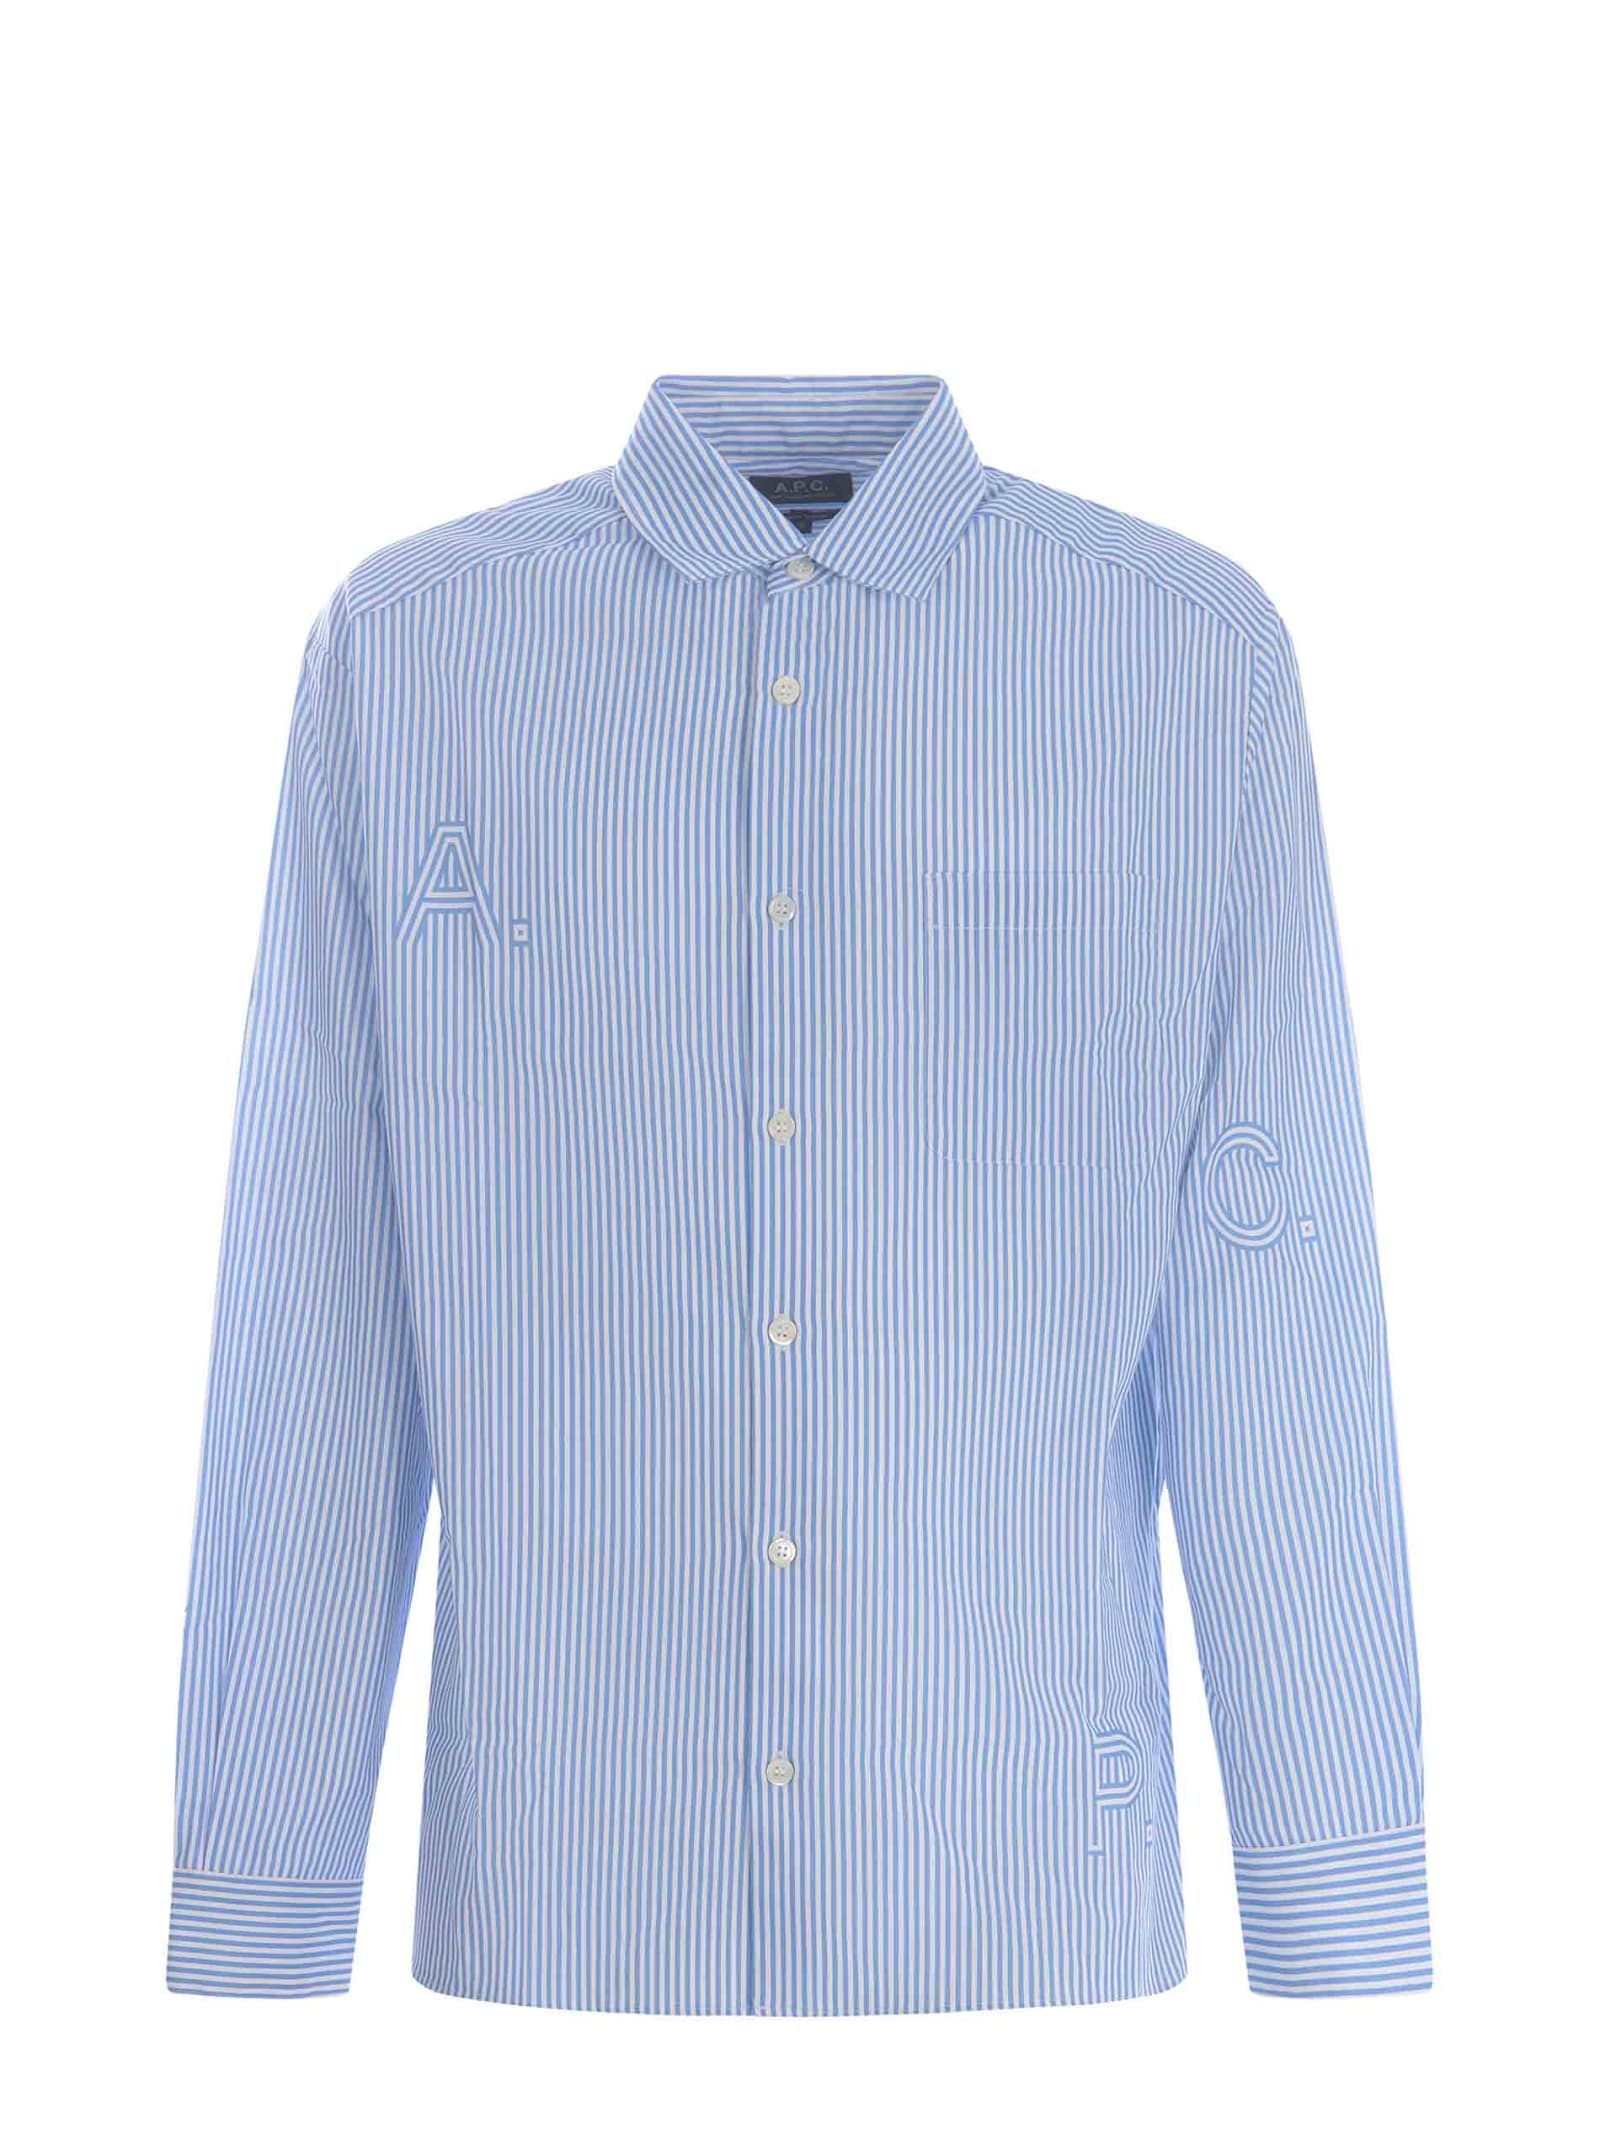 Shop Apc Shirt A.p.c. Malo Made Of Cotton In Light Blue